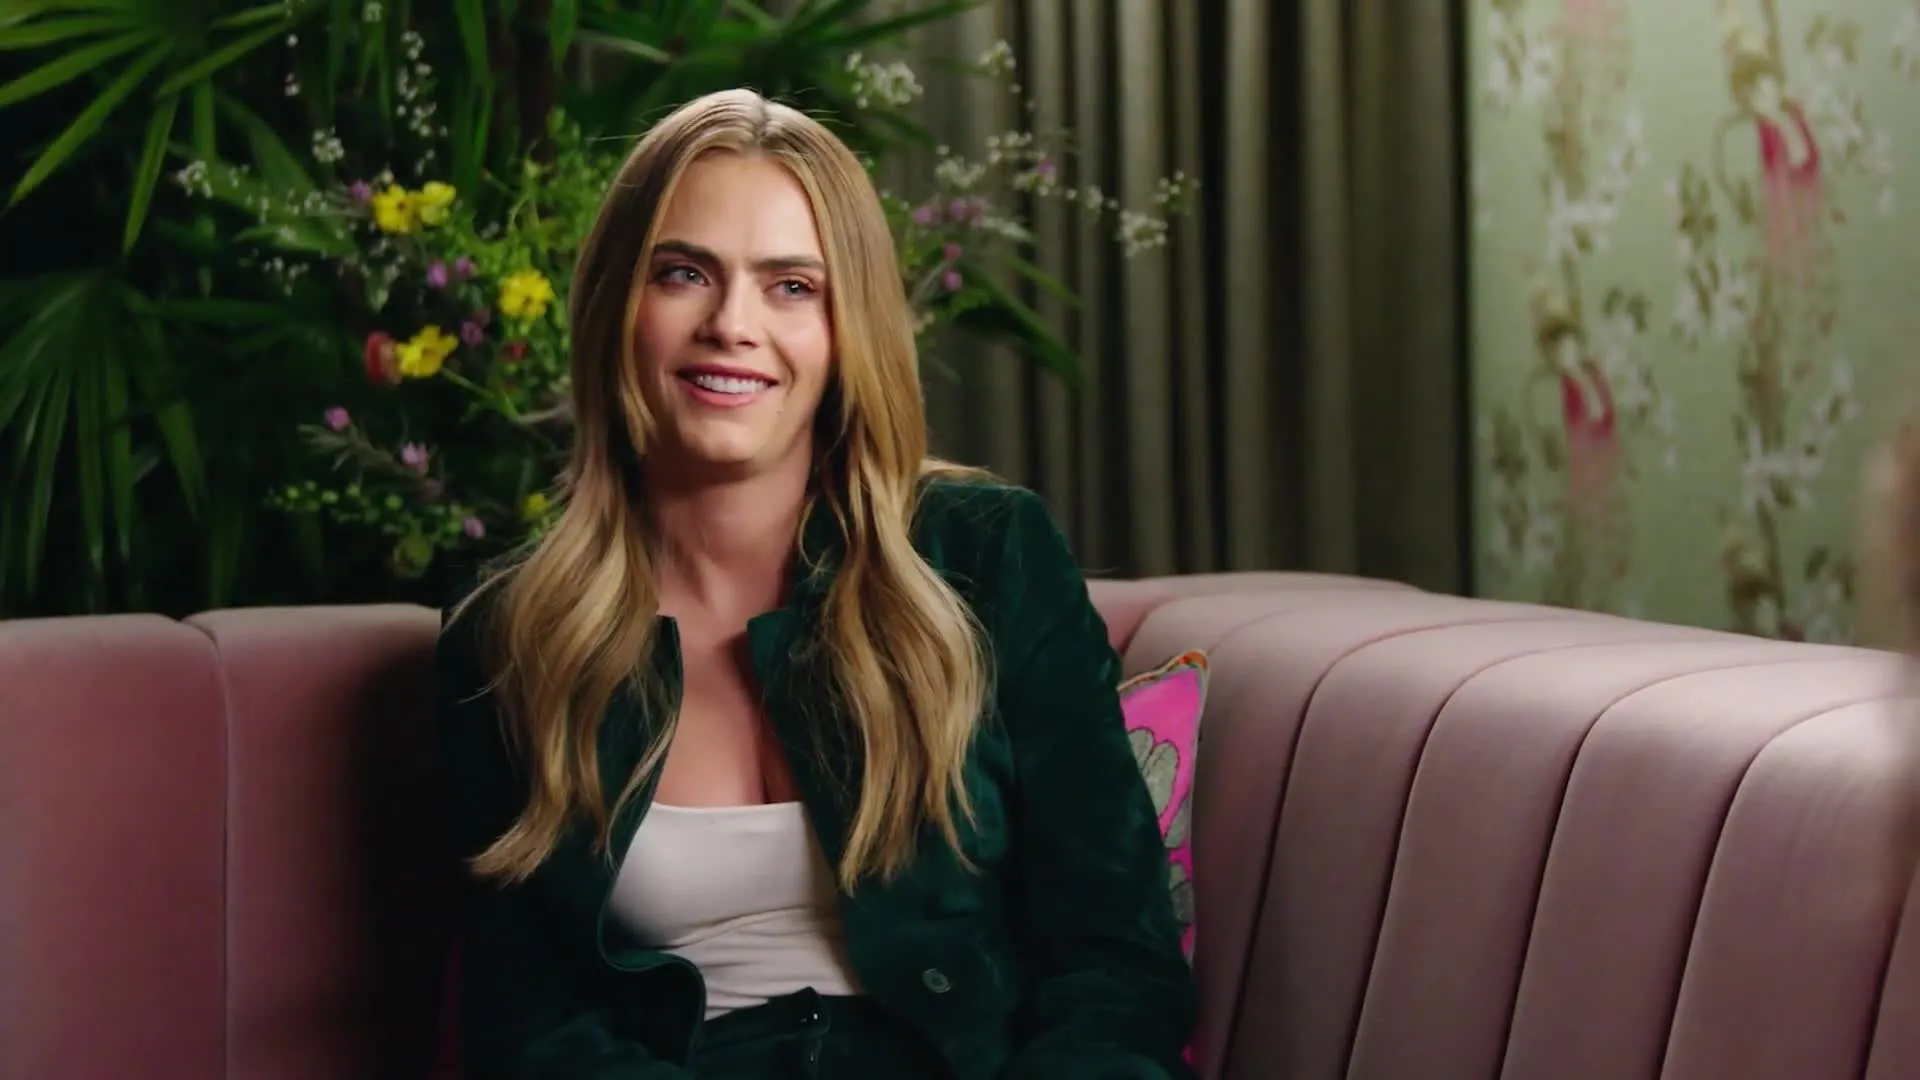 Cara Delevingne in the Vogue interview